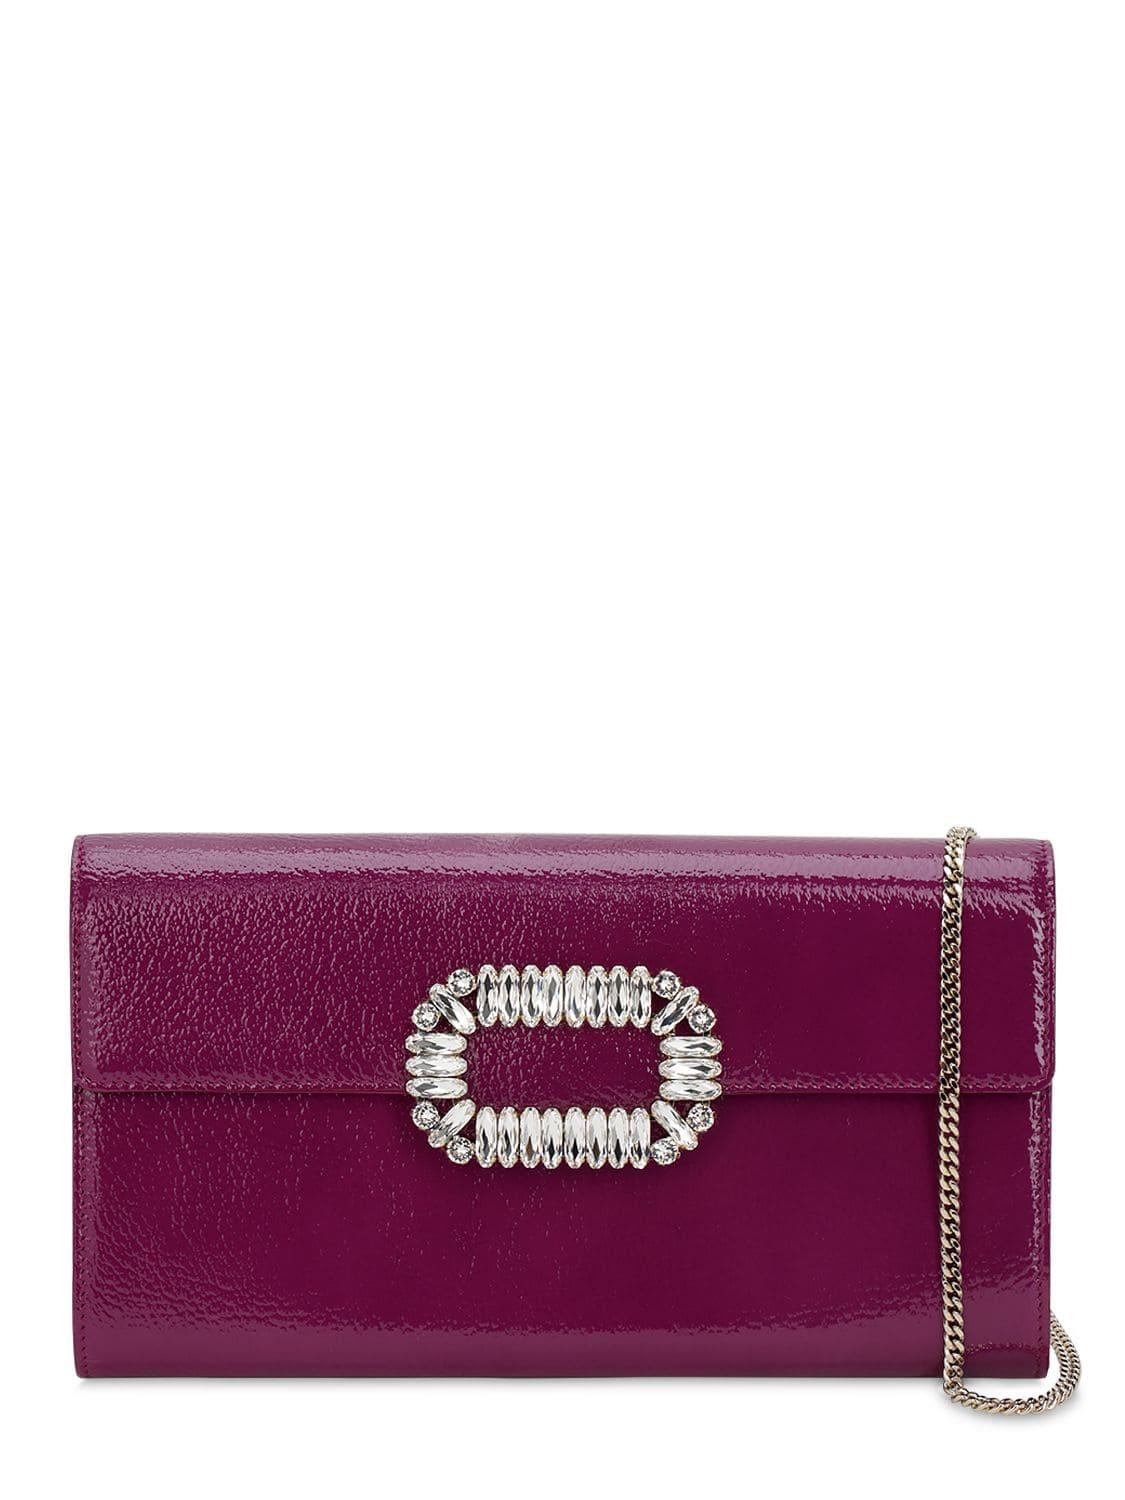 Roger Vivier Sexy Choc Crystals Patent Leather Clutch in Purple - Lyst